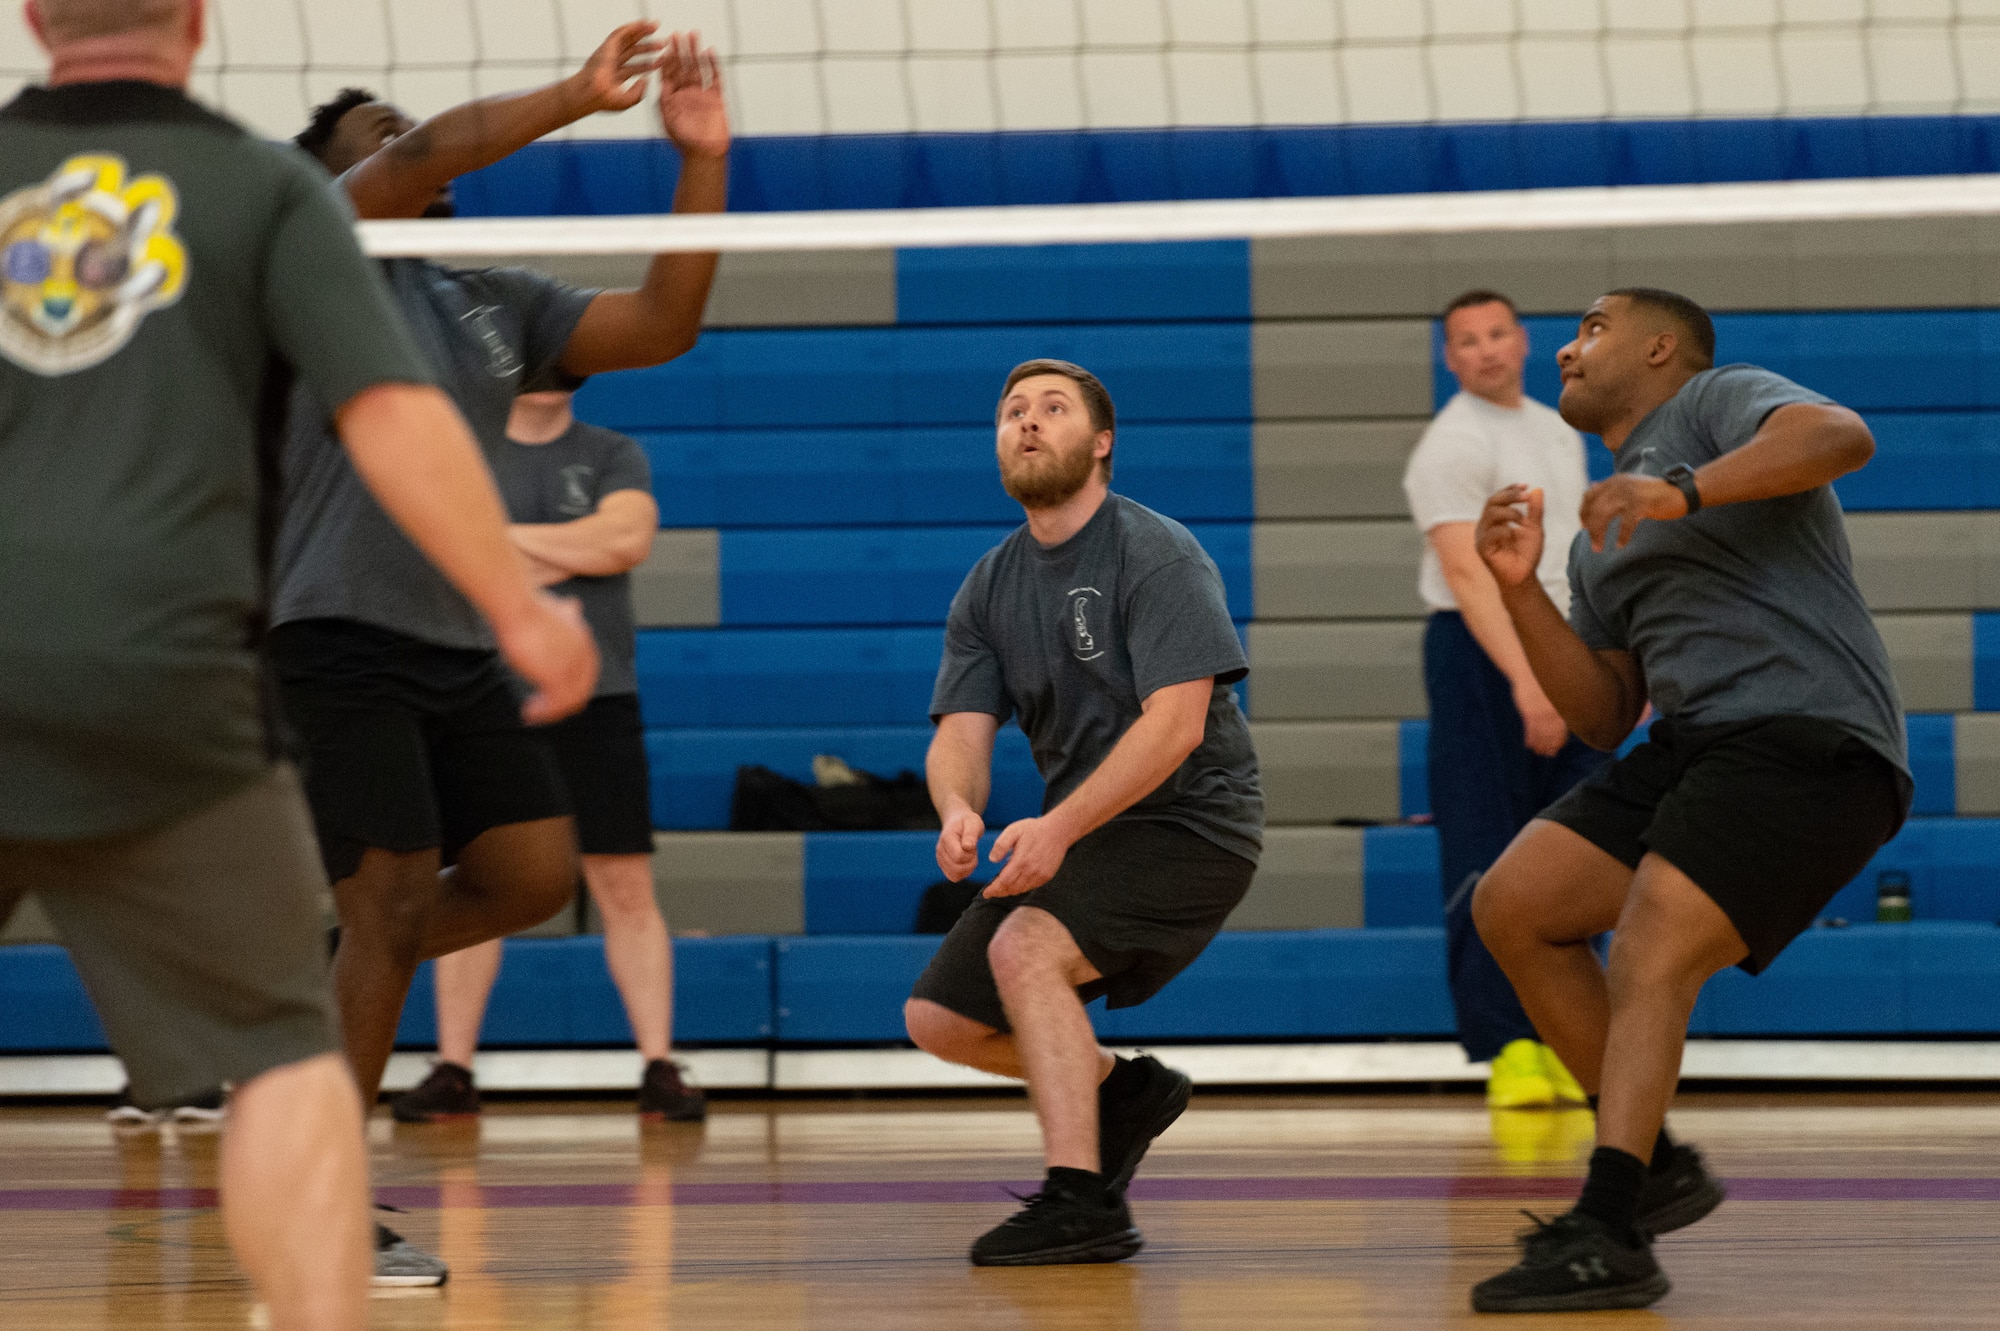 Dillon Lackus, center, Air Force Mortuary Affairs Operations mortuary clerk, gets in position during a volleyball game played between the Staff Sgt. Julio Alonso Airman Leadership School, Class 23-E, students versus commanders and first sergeants at the Fitness Center on Dover Air Force Base, Delaware, April 24, 2023. Lackus was the first civilian Airman to graduate from the Staff Sgt. Julio Alonso ALS. (U.S. Air Force photo by Roland Balik)